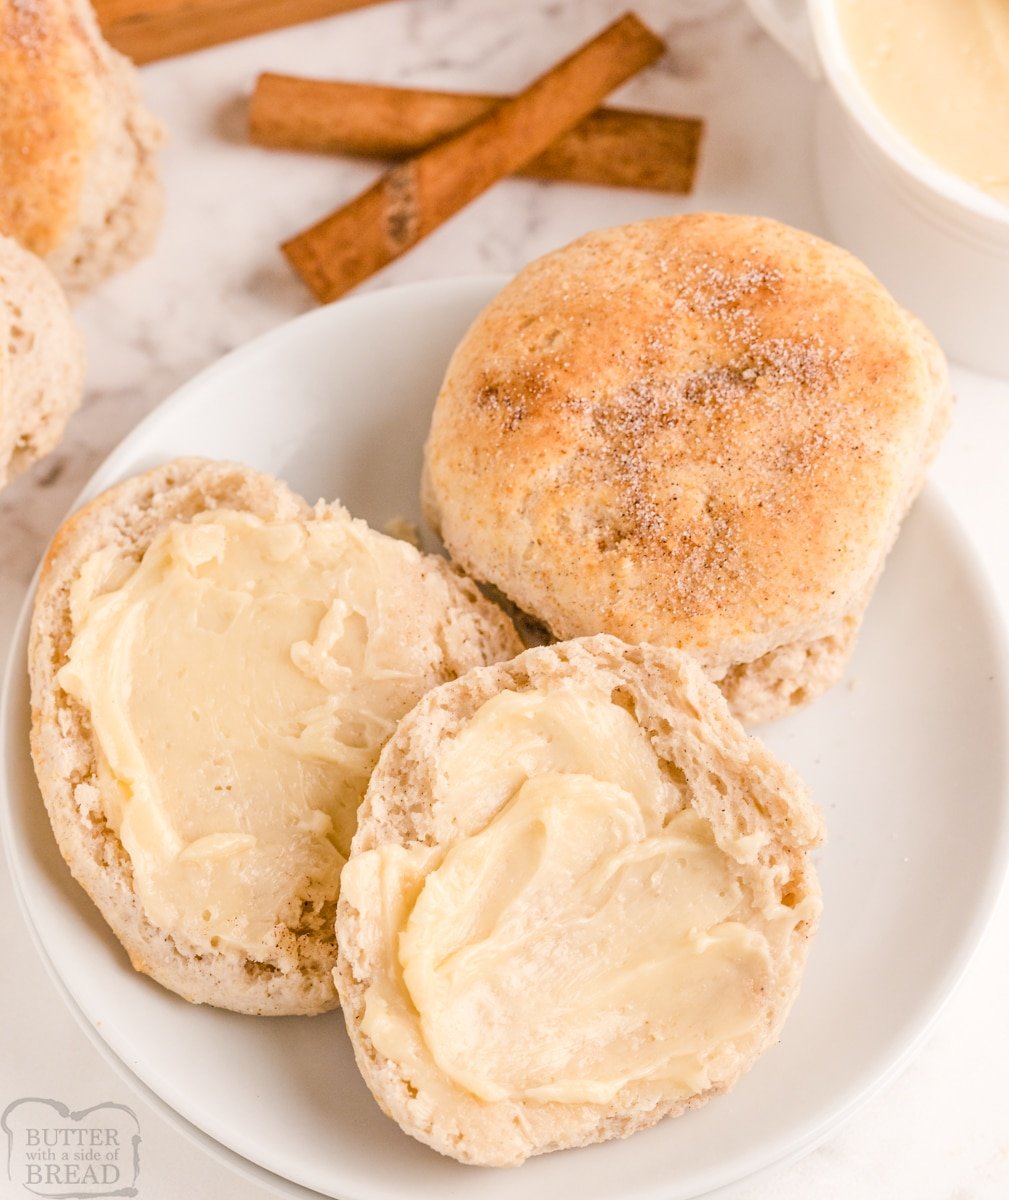 https://butterwithasideofbread.com/wp-content/uploads/2021/08/CInnamon-Biscuits-with-Honey-Butter-recipe-23.jpg